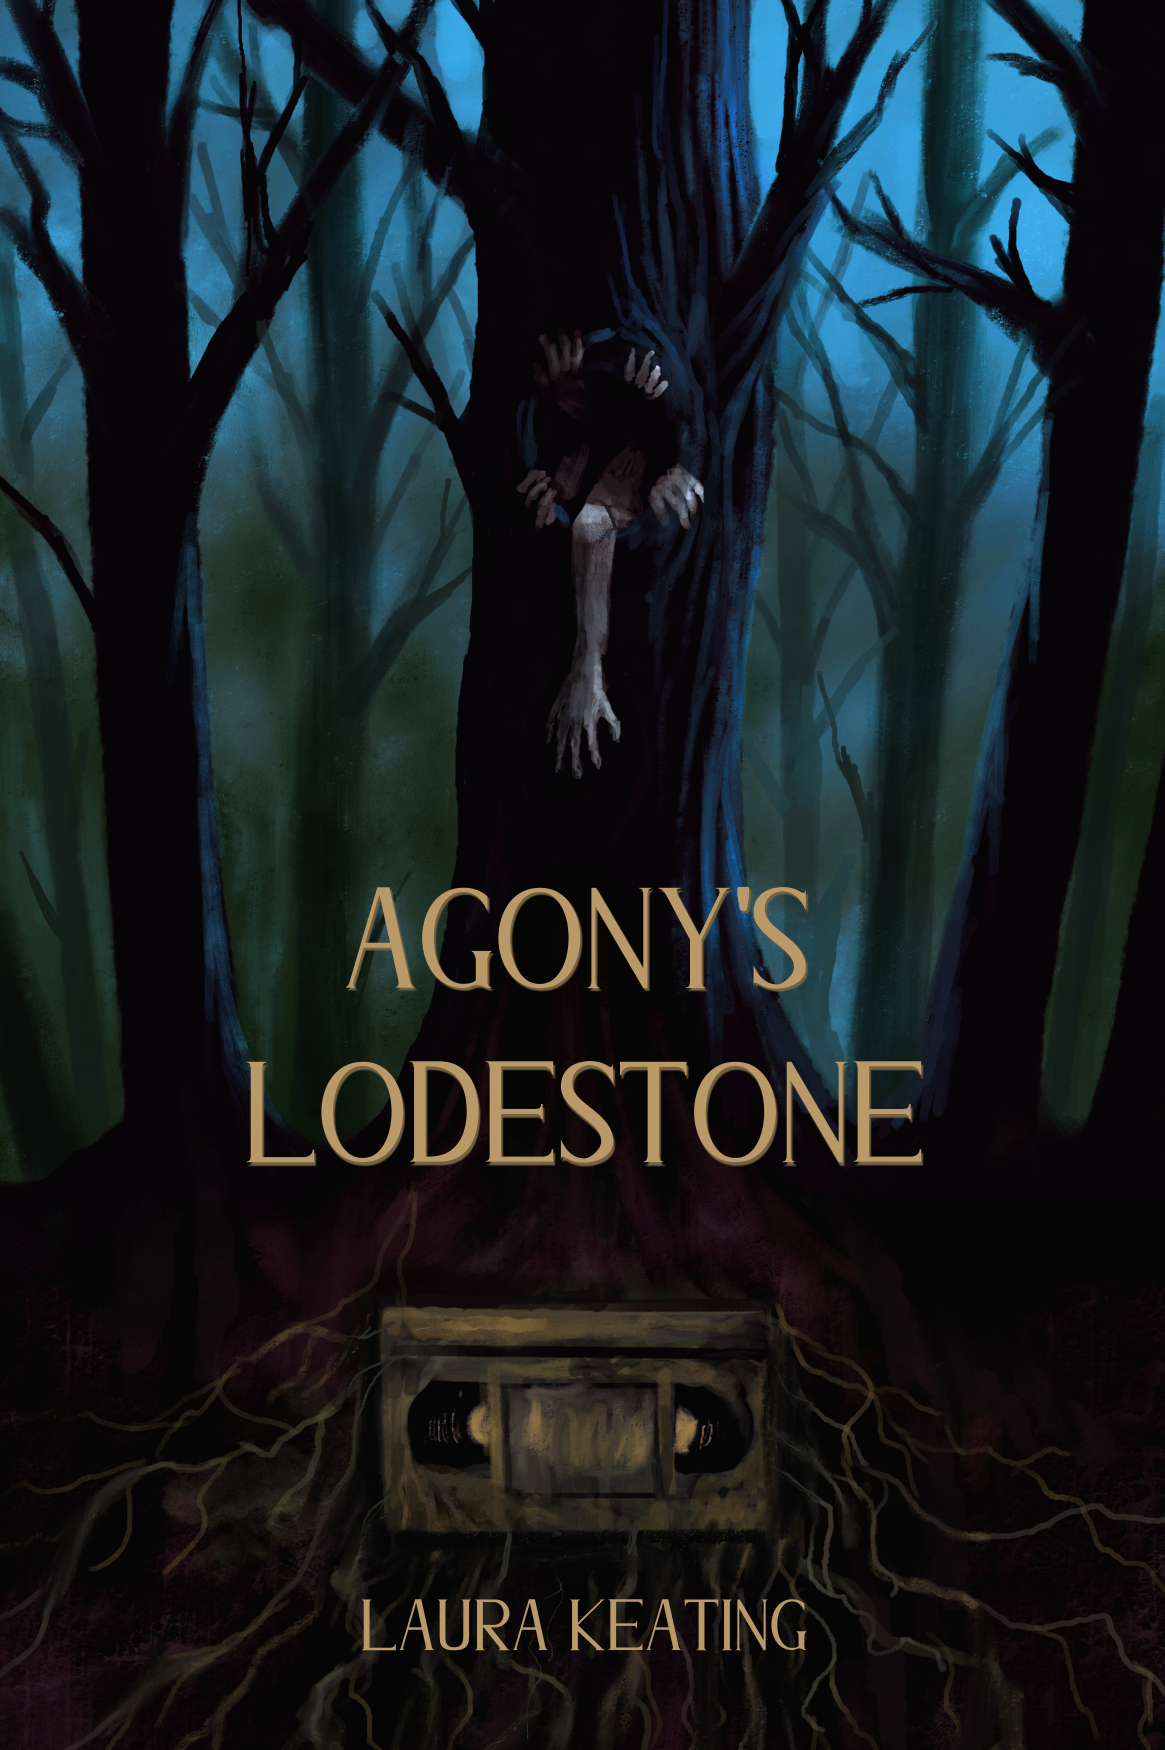 
					Cover art from "Agony